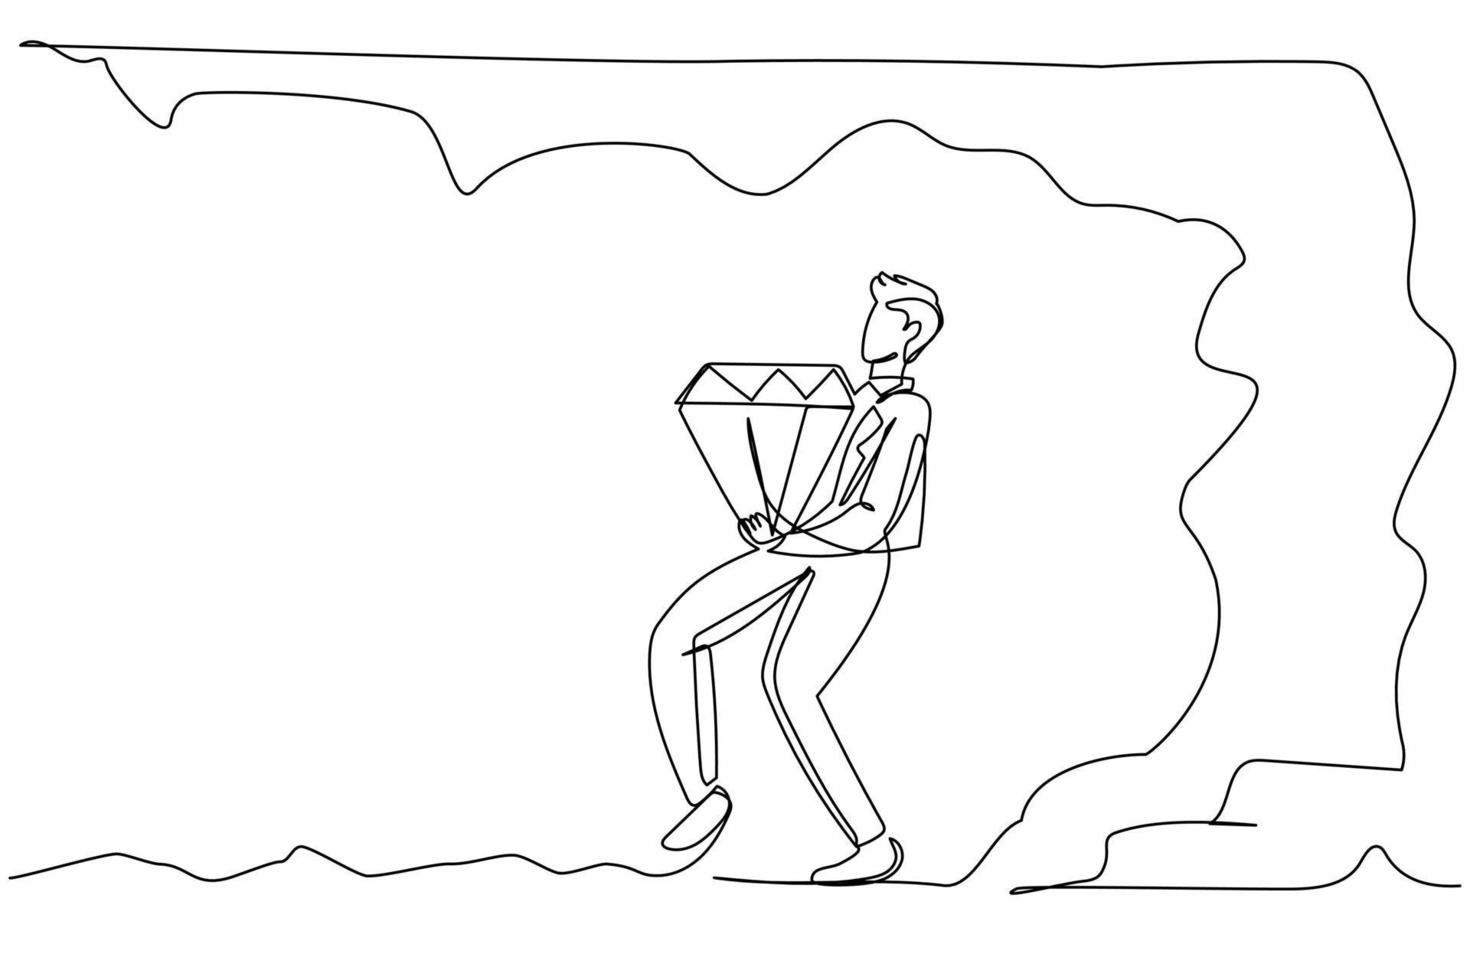 Single one line drawing attractive businessman carrying big diamond from underground. Treasure digging diamond stone. Success, achievement concept. Continuous line design graphic vector illustration